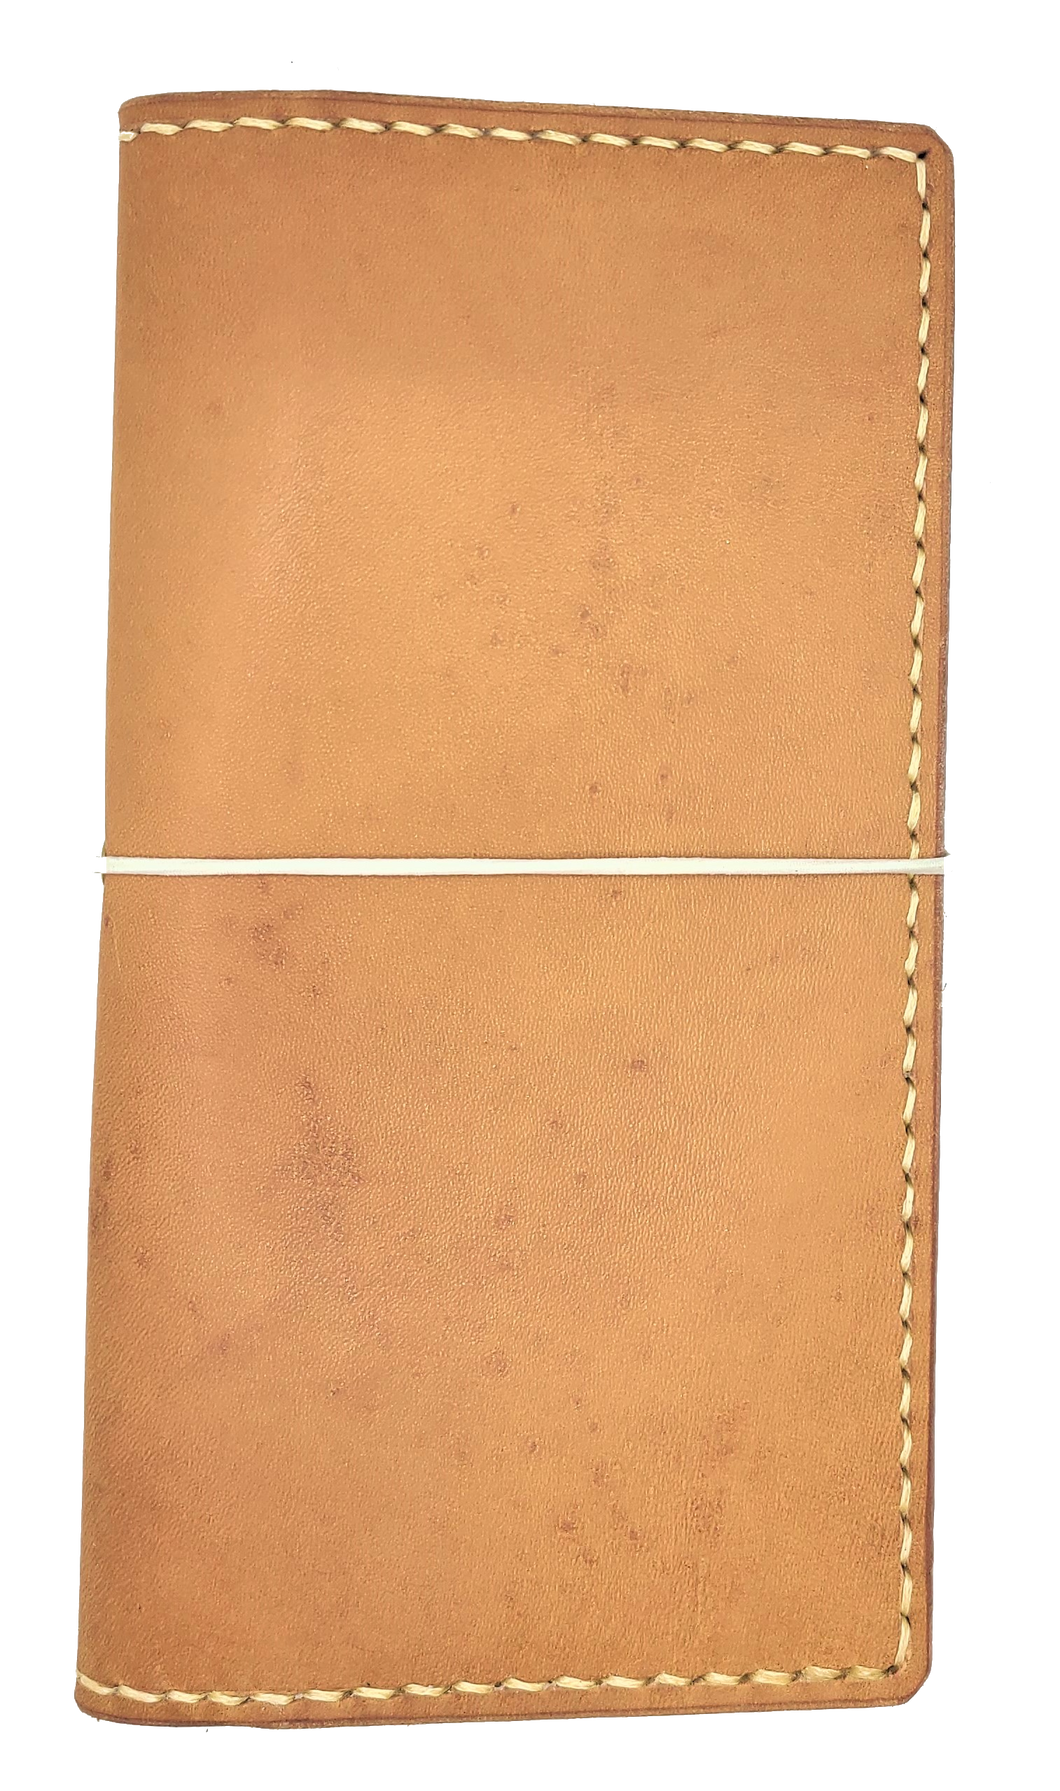 Hobonichi weeks and weeks mega cover, natural veg tanned leather, hand crafted, tan, folio style